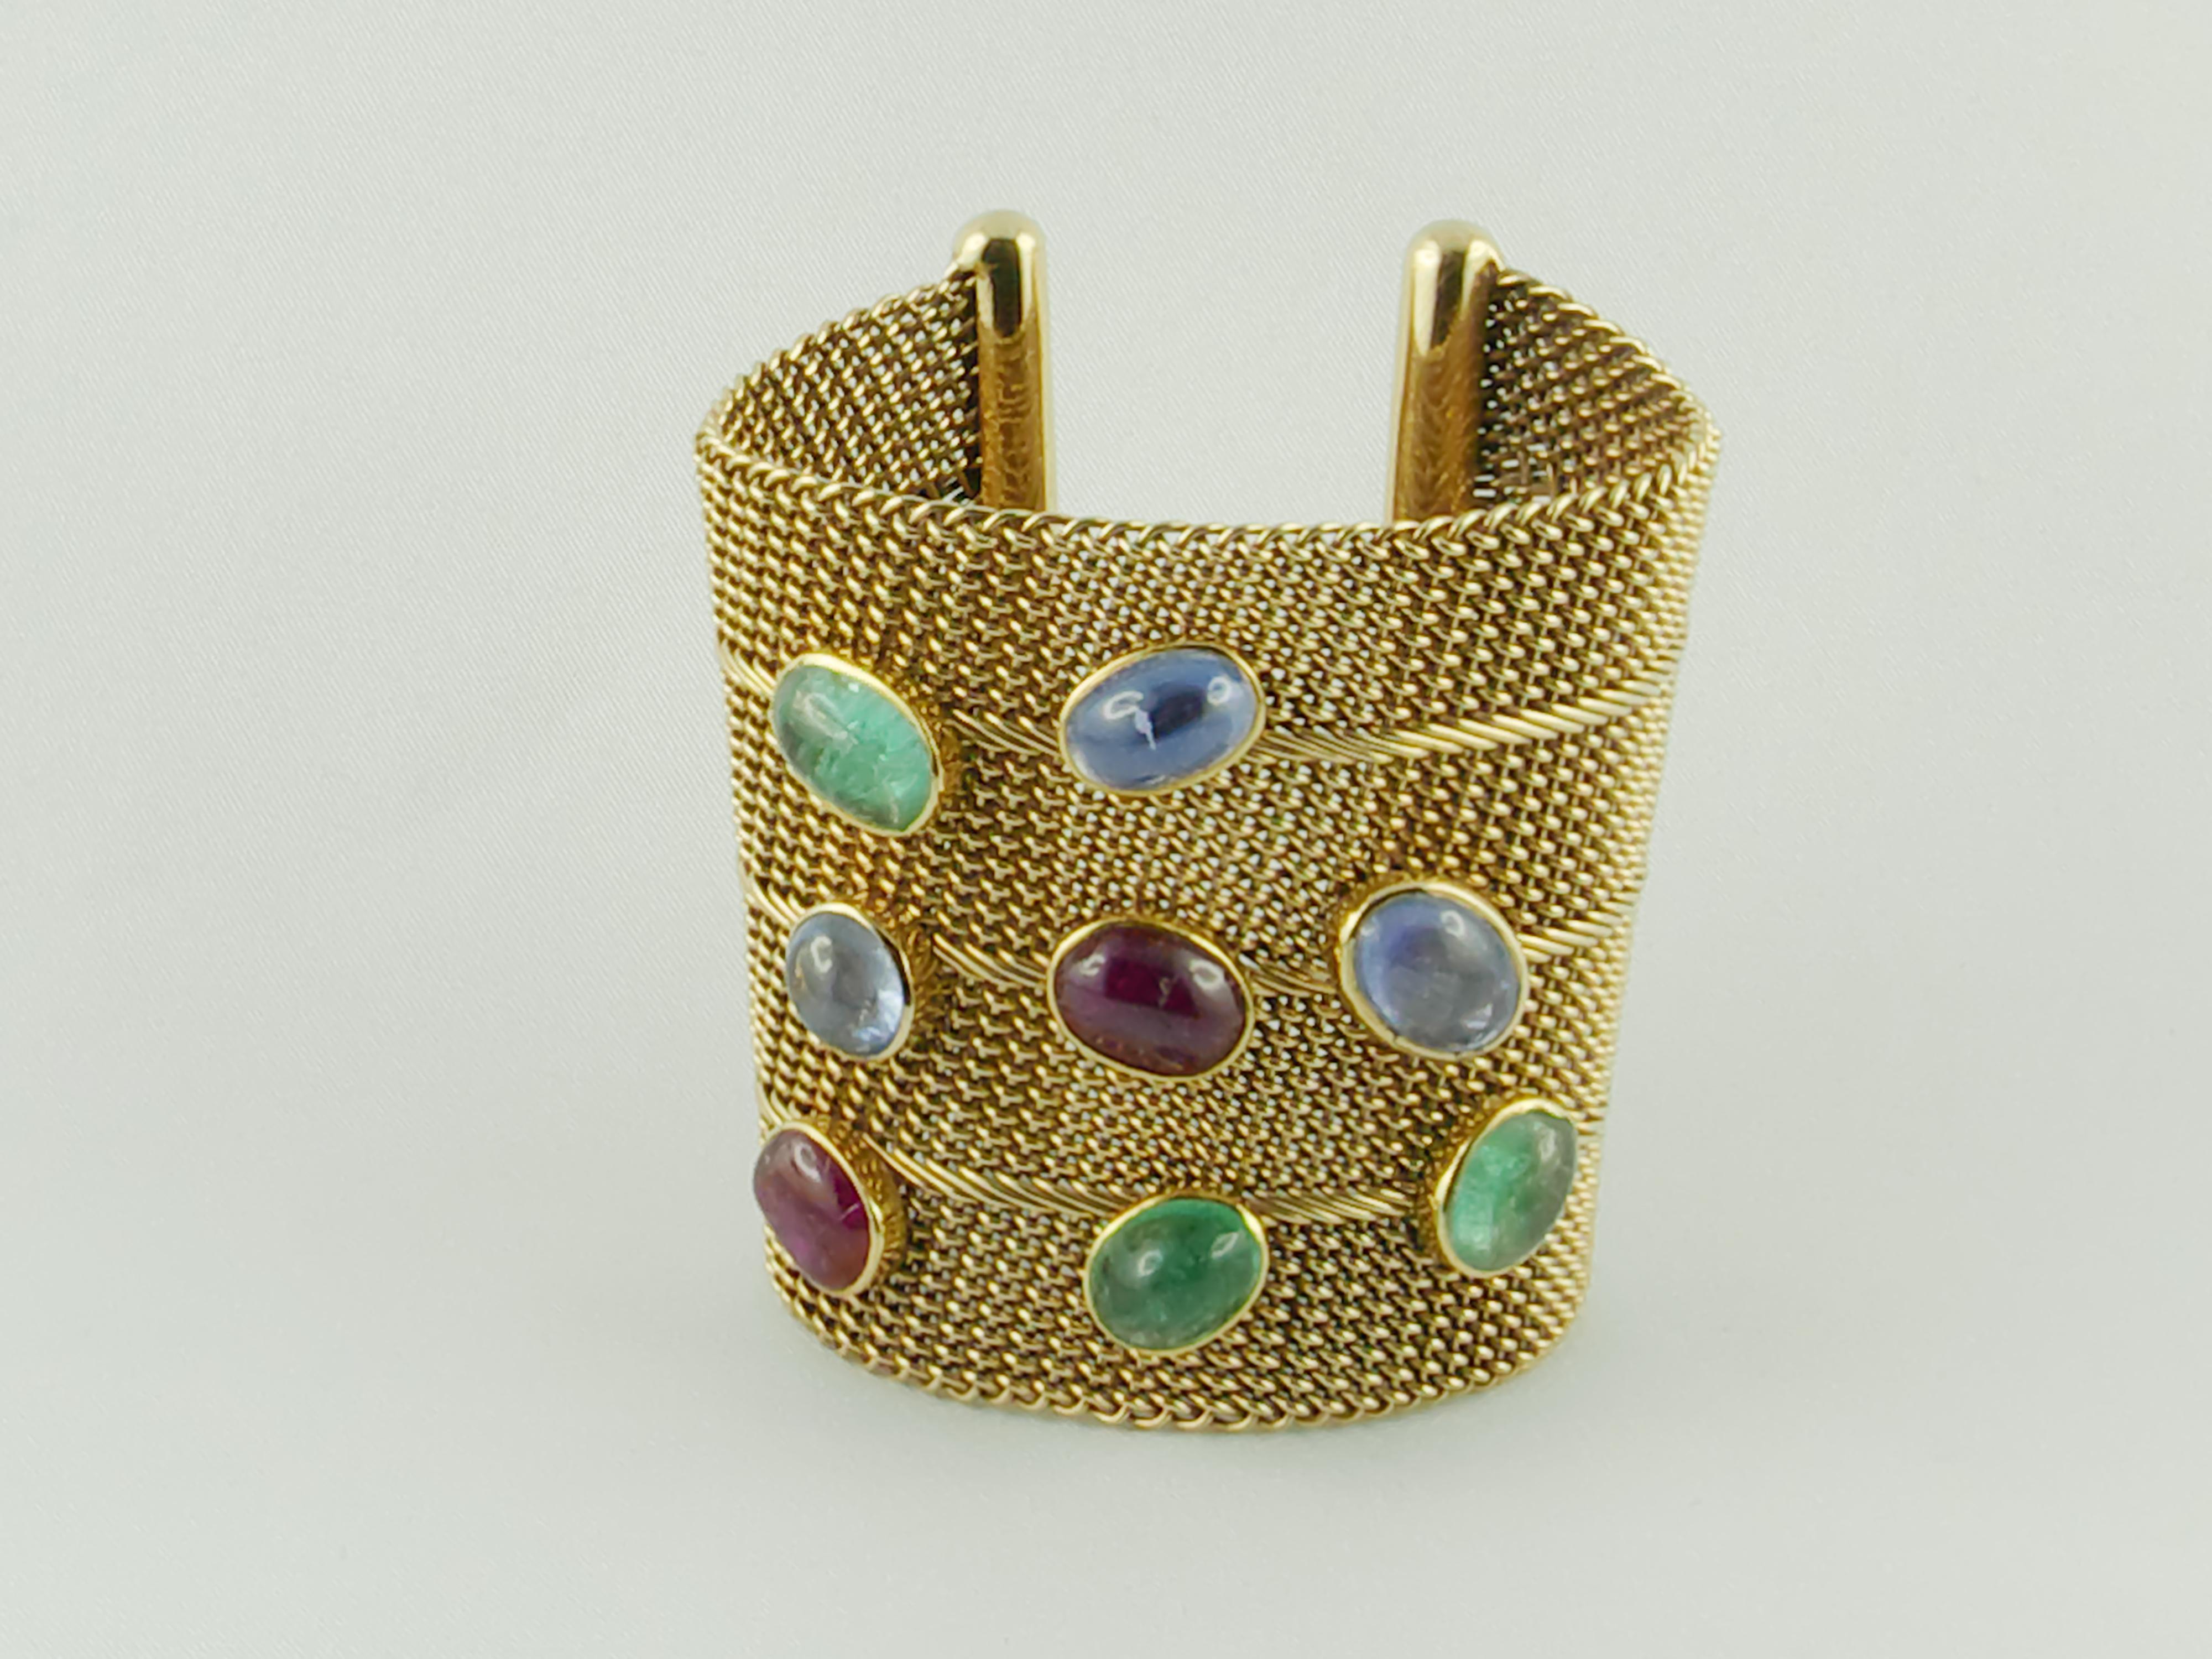 Attractive and unconventional 1970s Mesh Net Wrist Armlet 14 Karat Yellow Gold with two Ruby three Emerald and three Sapphire Cabochons.
This eye-catching dramatic color contrast Bracelet is an elegant and casually sophisticated piece that fits a